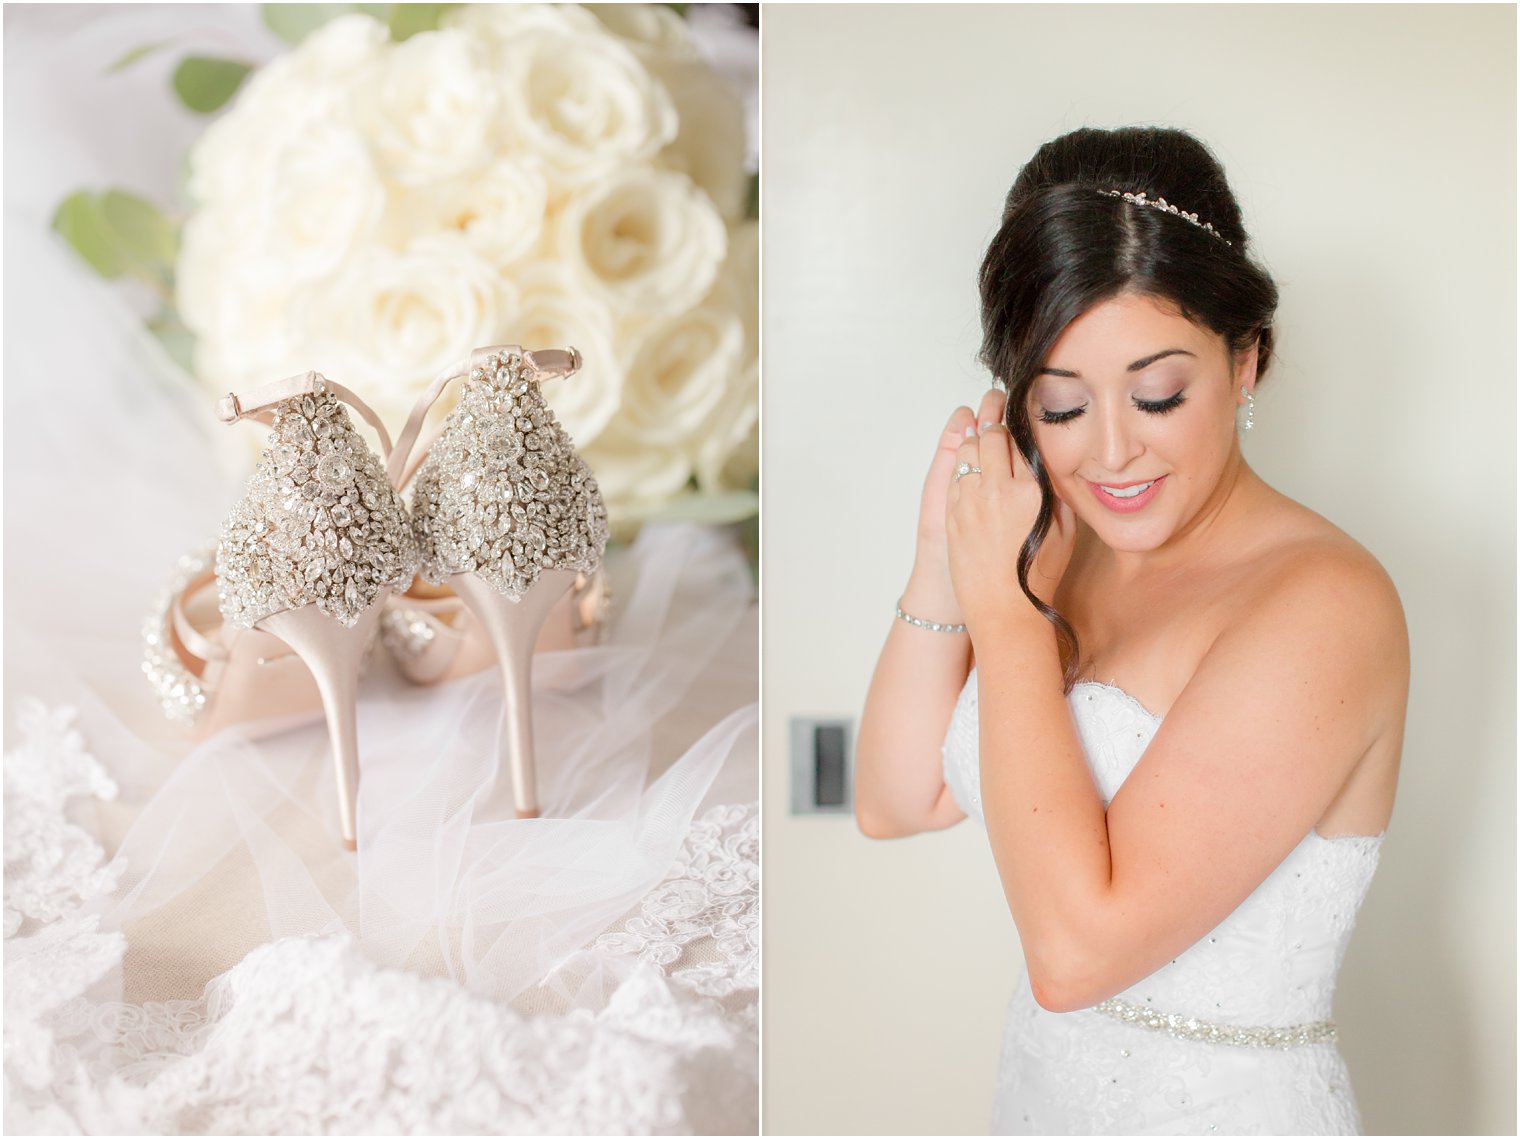 classic bridal portrait paired with blush jeweled wedding heels photographed by Idalia Photography